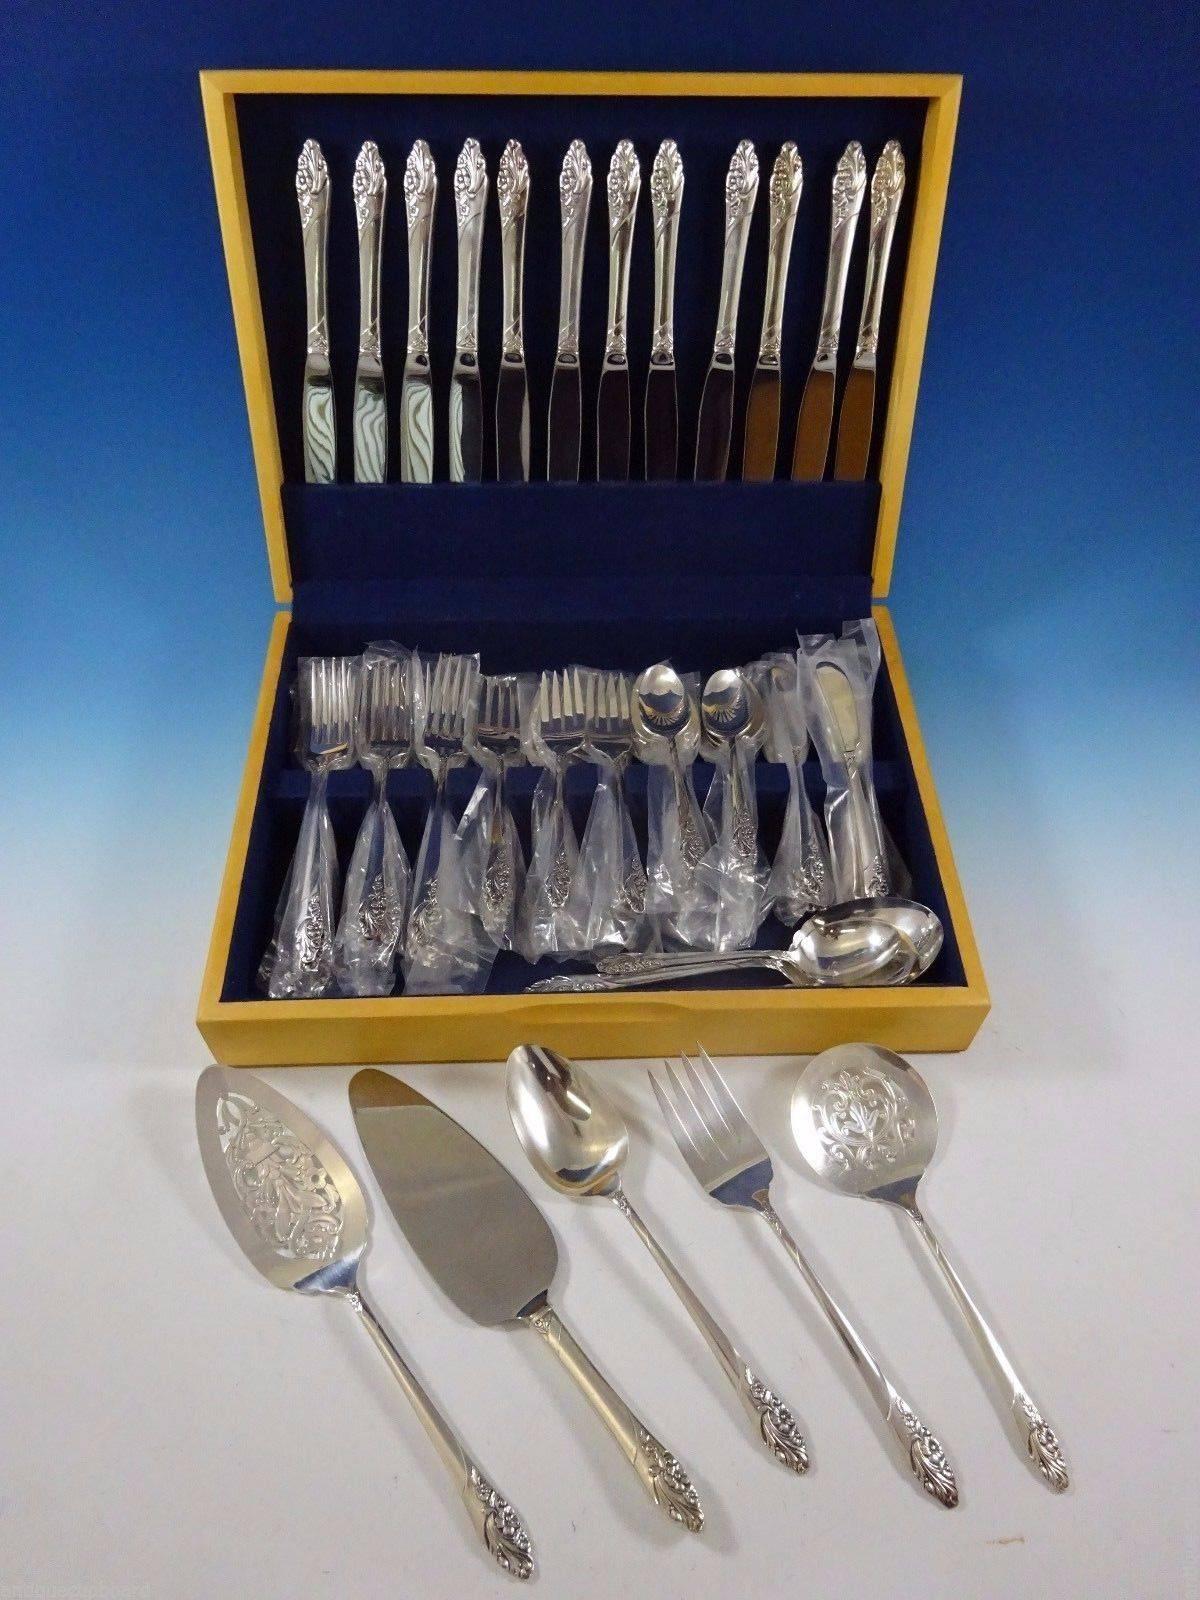 Evening star by community plate silver plate flatware set, 69 pieces. This set includes: 

12 dinner knives, 9 1/4